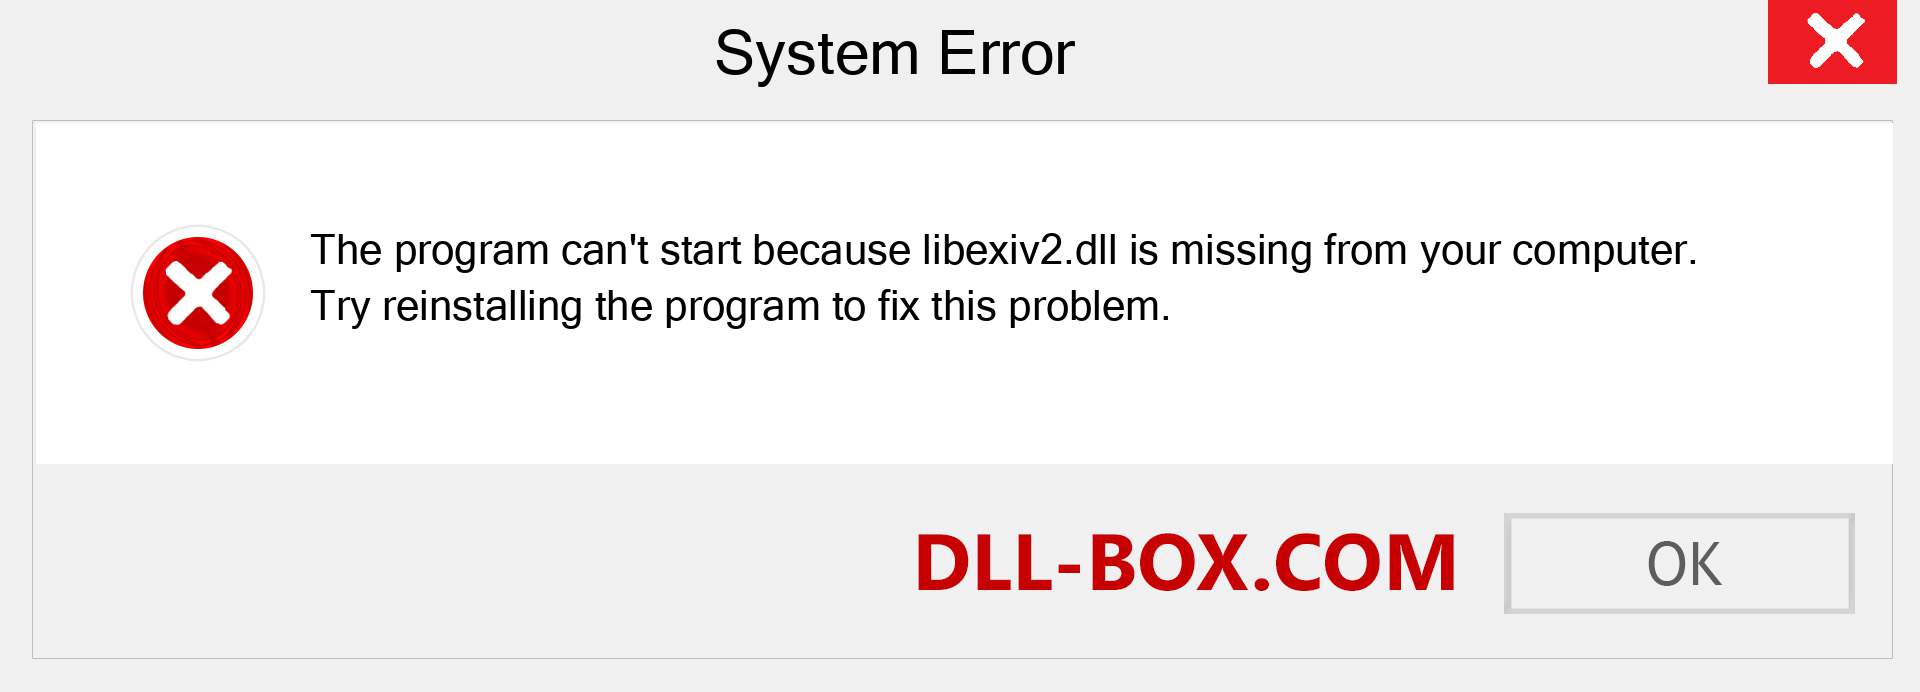  libexiv2.dll file is missing?. Download for Windows 7, 8, 10 - Fix  libexiv2 dll Missing Error on Windows, photos, images